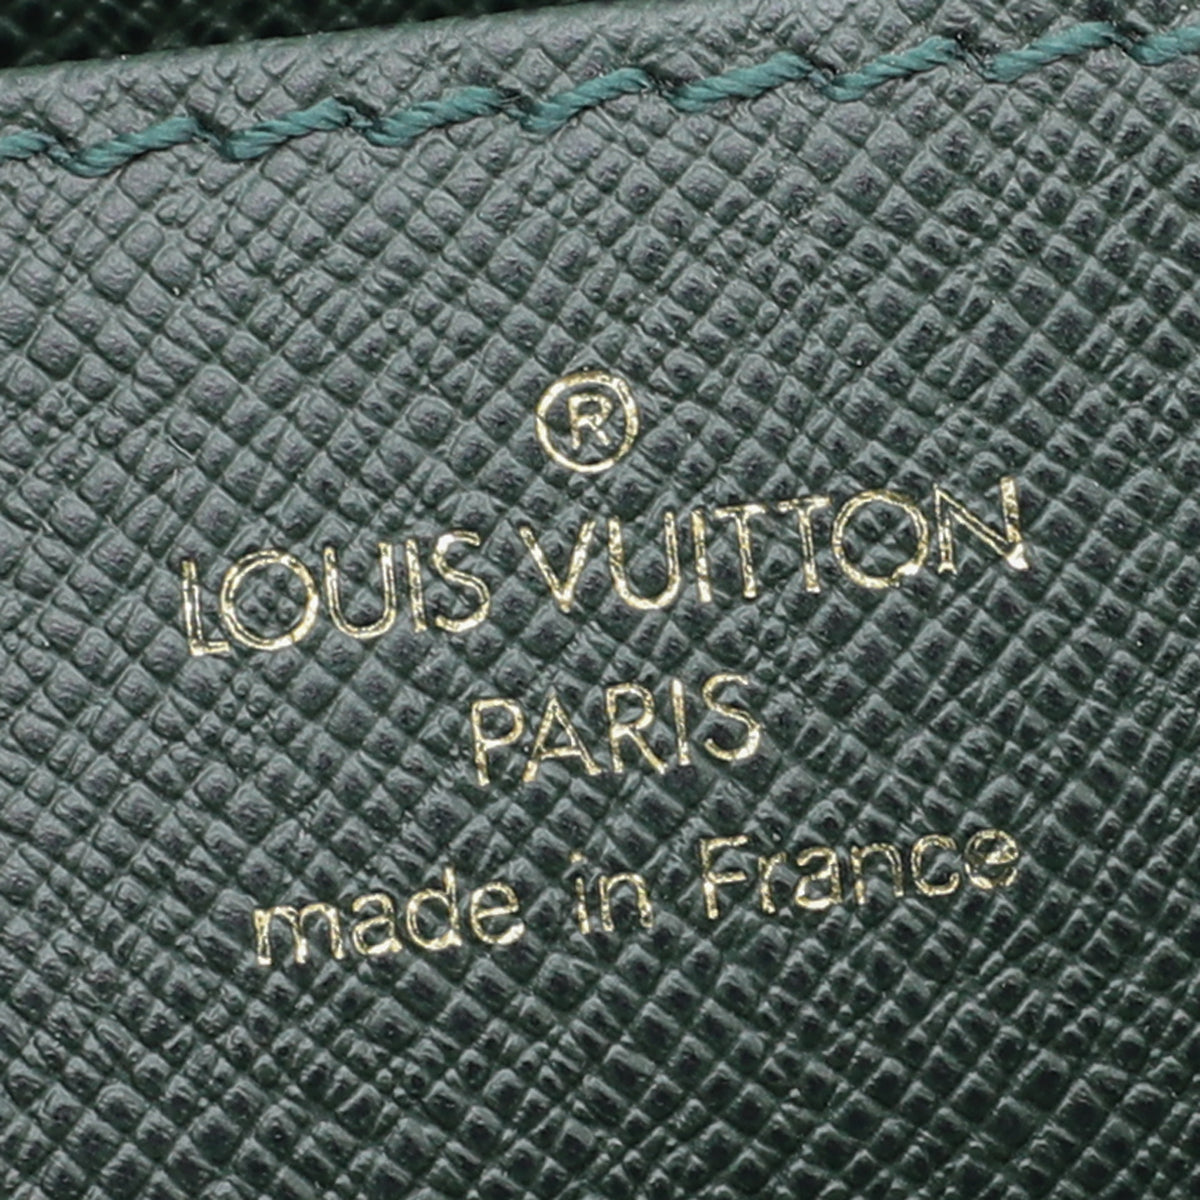 Louis Vuitton Olive Green Taiga Robusto Compartments Briefcase